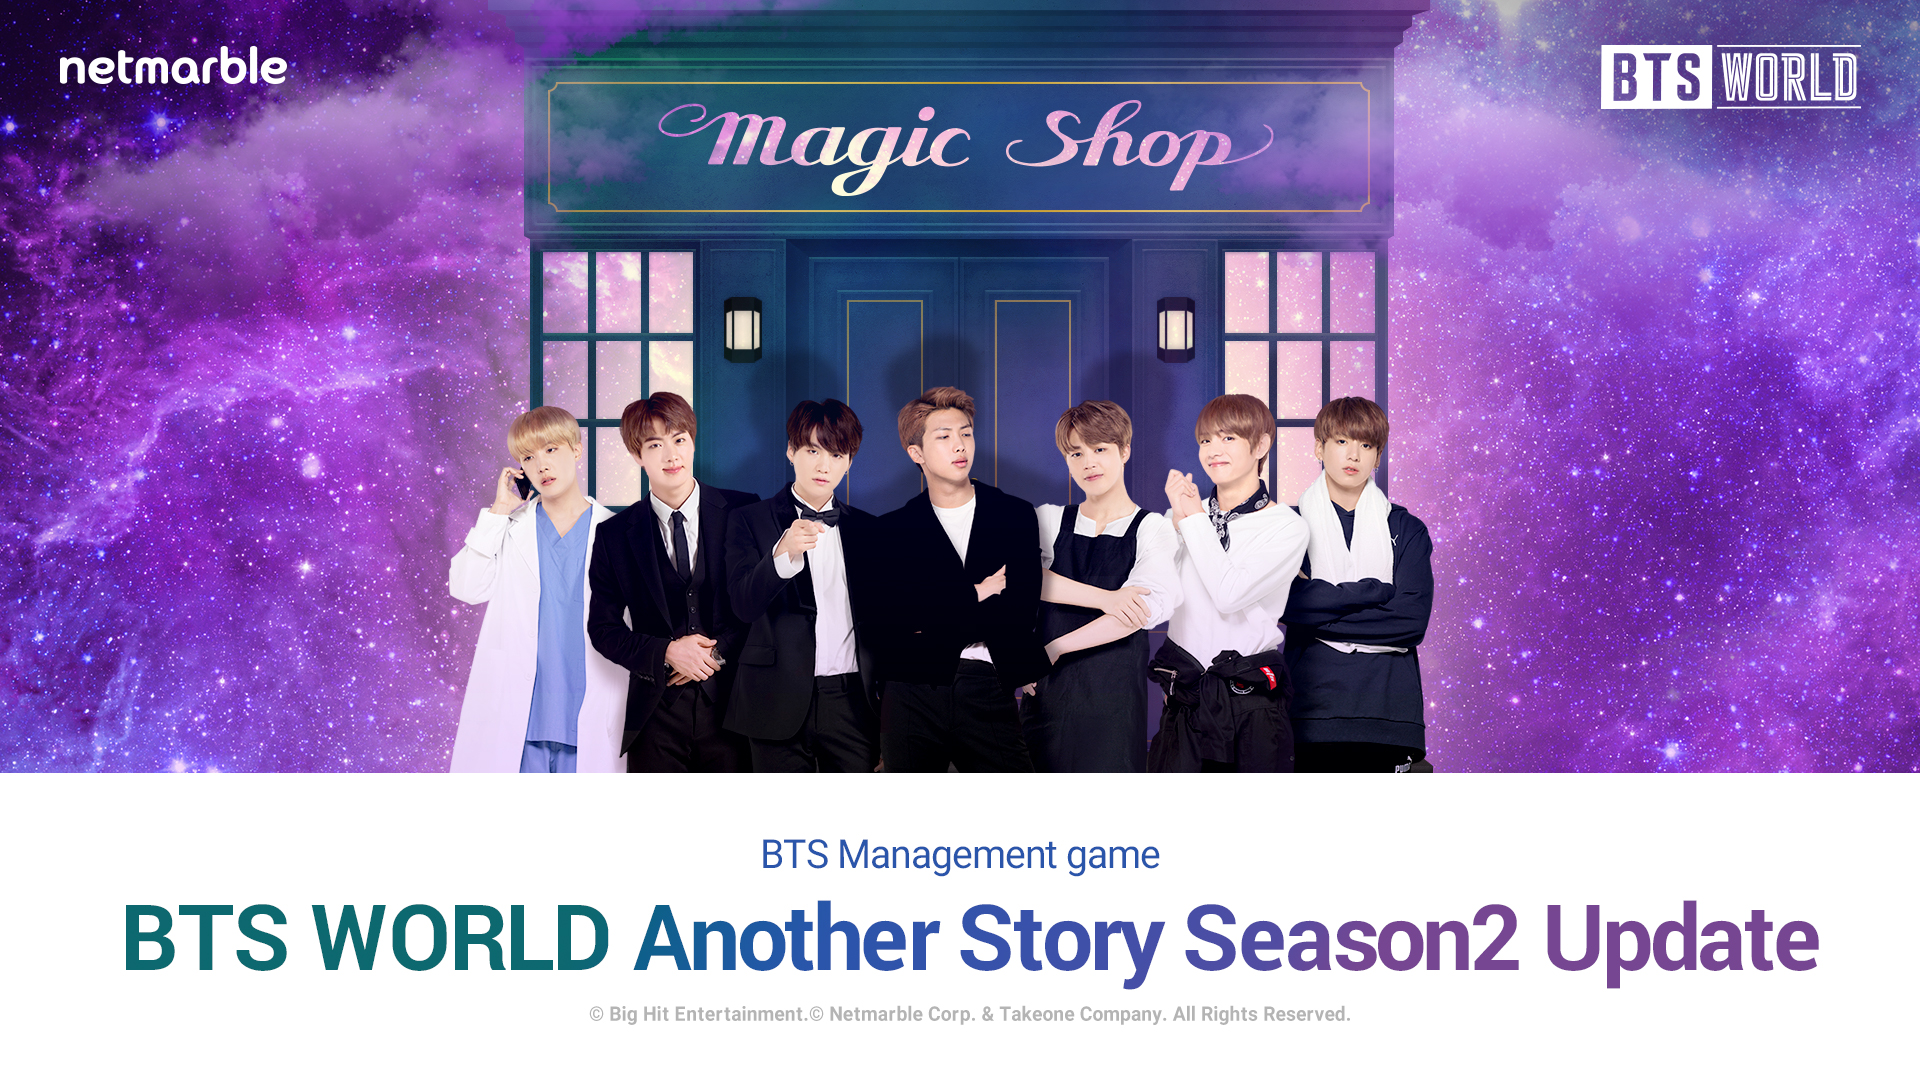 BTS VISIT THE “MAGIC SHOP” IN MARCH UPDATE OF BTS WORLD – Netmarble